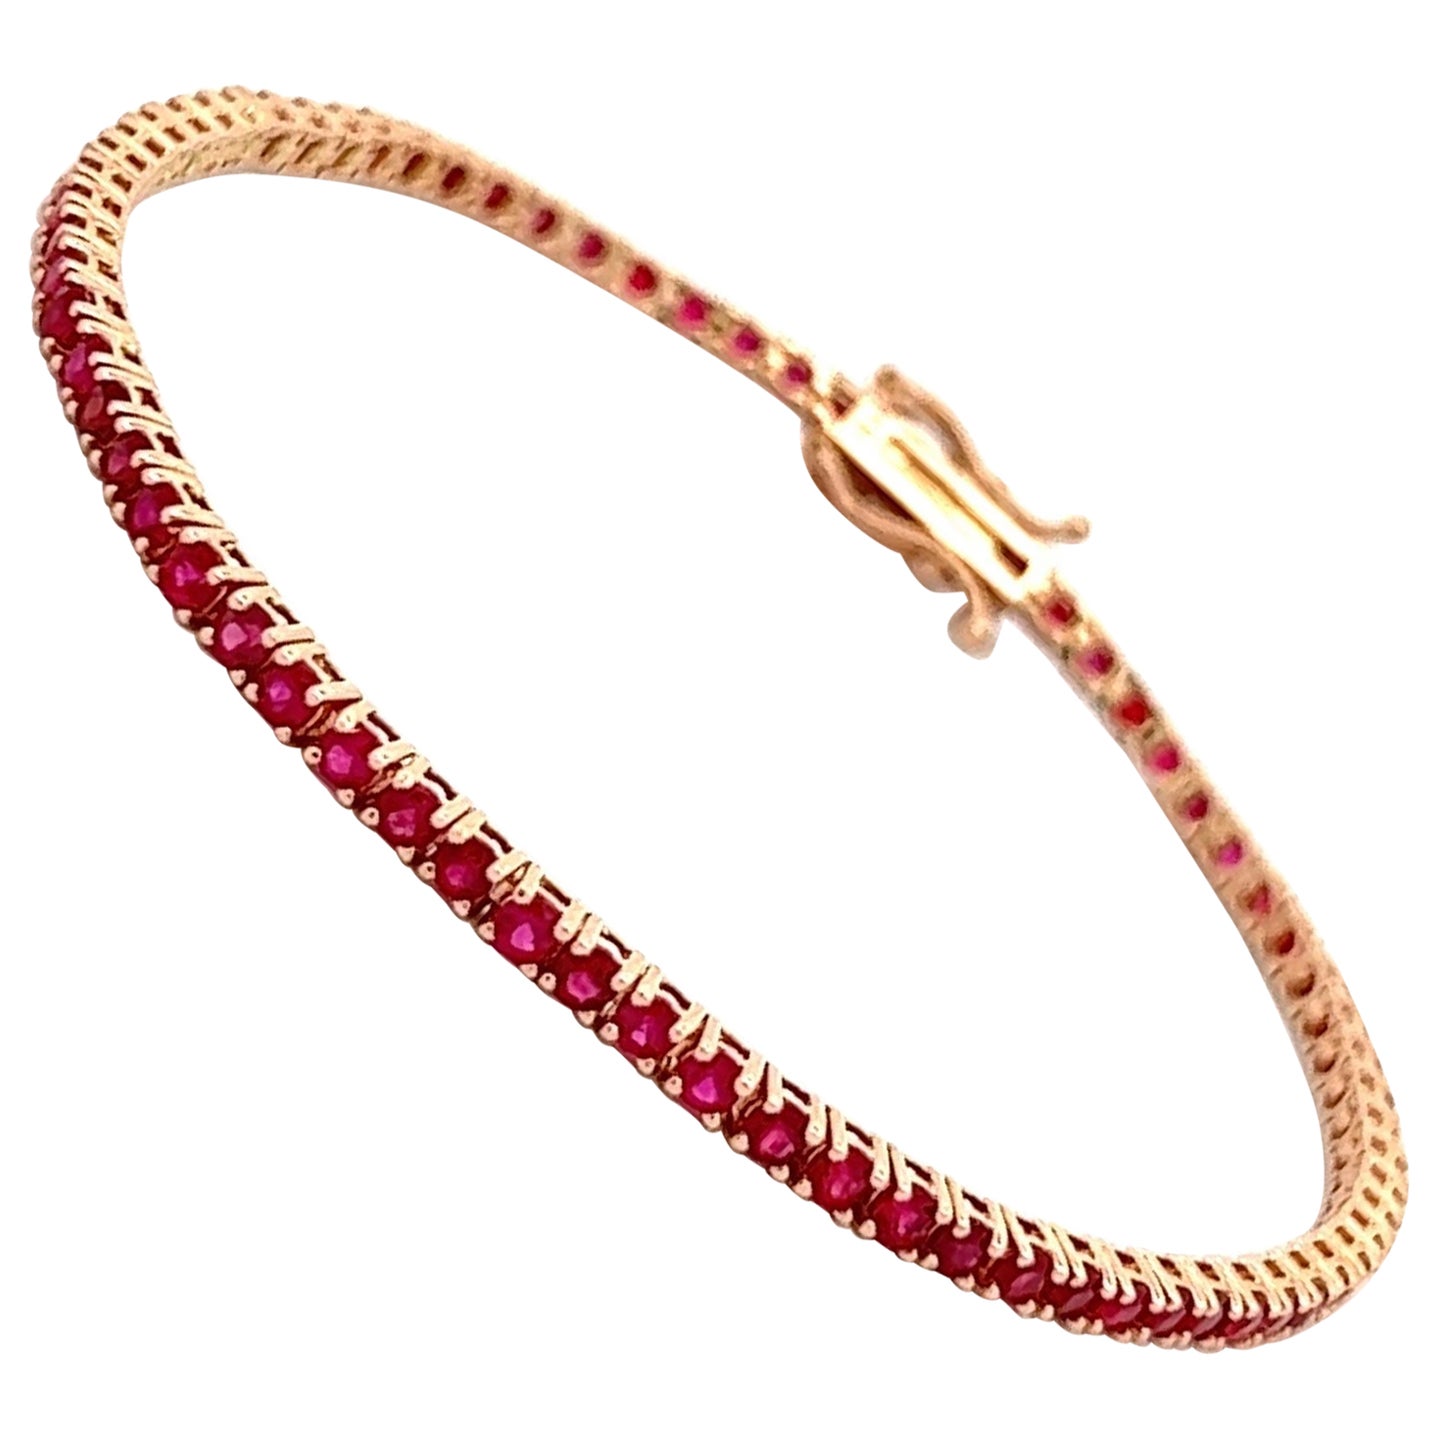 Natural Hot Red Rubies Tennis Bracelet in 14K Rose Gold, with 3.55 Carats Rubies.
Classic and everlasting Tennis Bracelet with 73 Natural Full Brilliant Cut Rubies.
14k Rose Gold
4 Prongs Setting
Number of Rubies: 73
Total Rubies Weight: 3.55 Carats